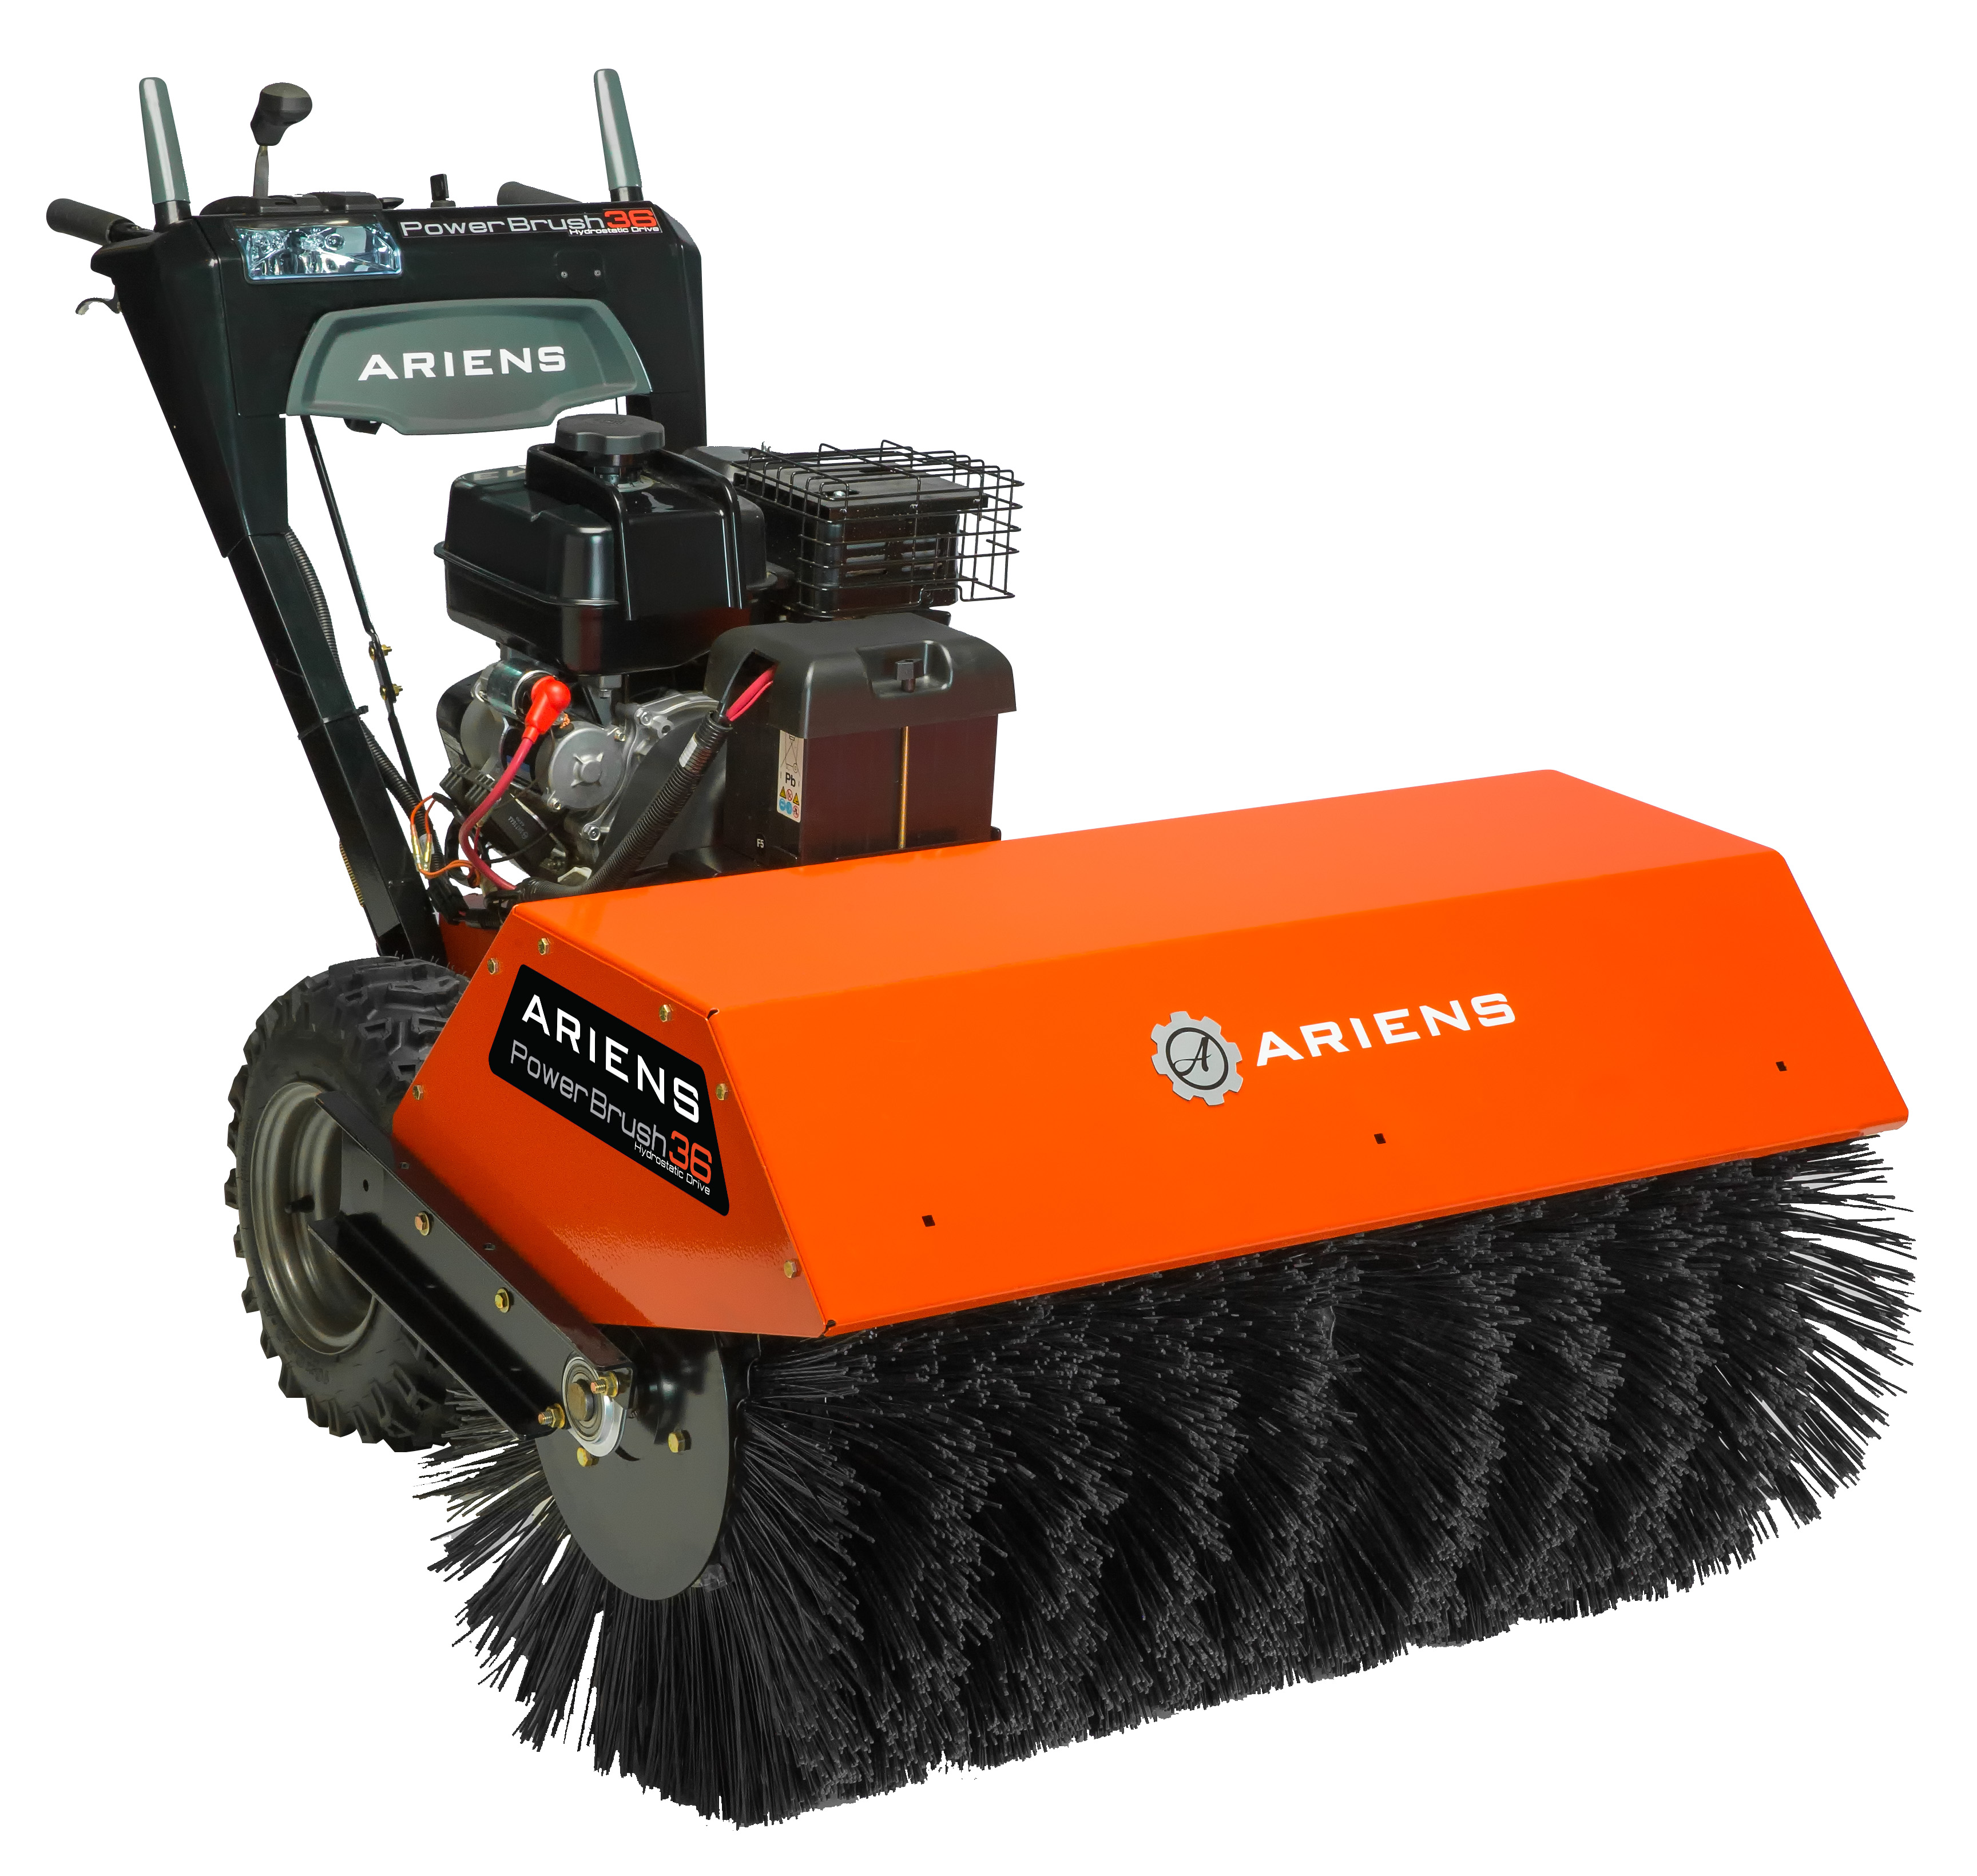 ARIENS SNOW/POWER BRUSH 
36&quot; 120V ELECTRIC START,
265CC ALL-SEASON SUBURU
ENGINE, 36&quot; CLEARING WIDTH,
COMMERCIAL GRADE HANDLE BAR
CARB-COMPLIANT 926087